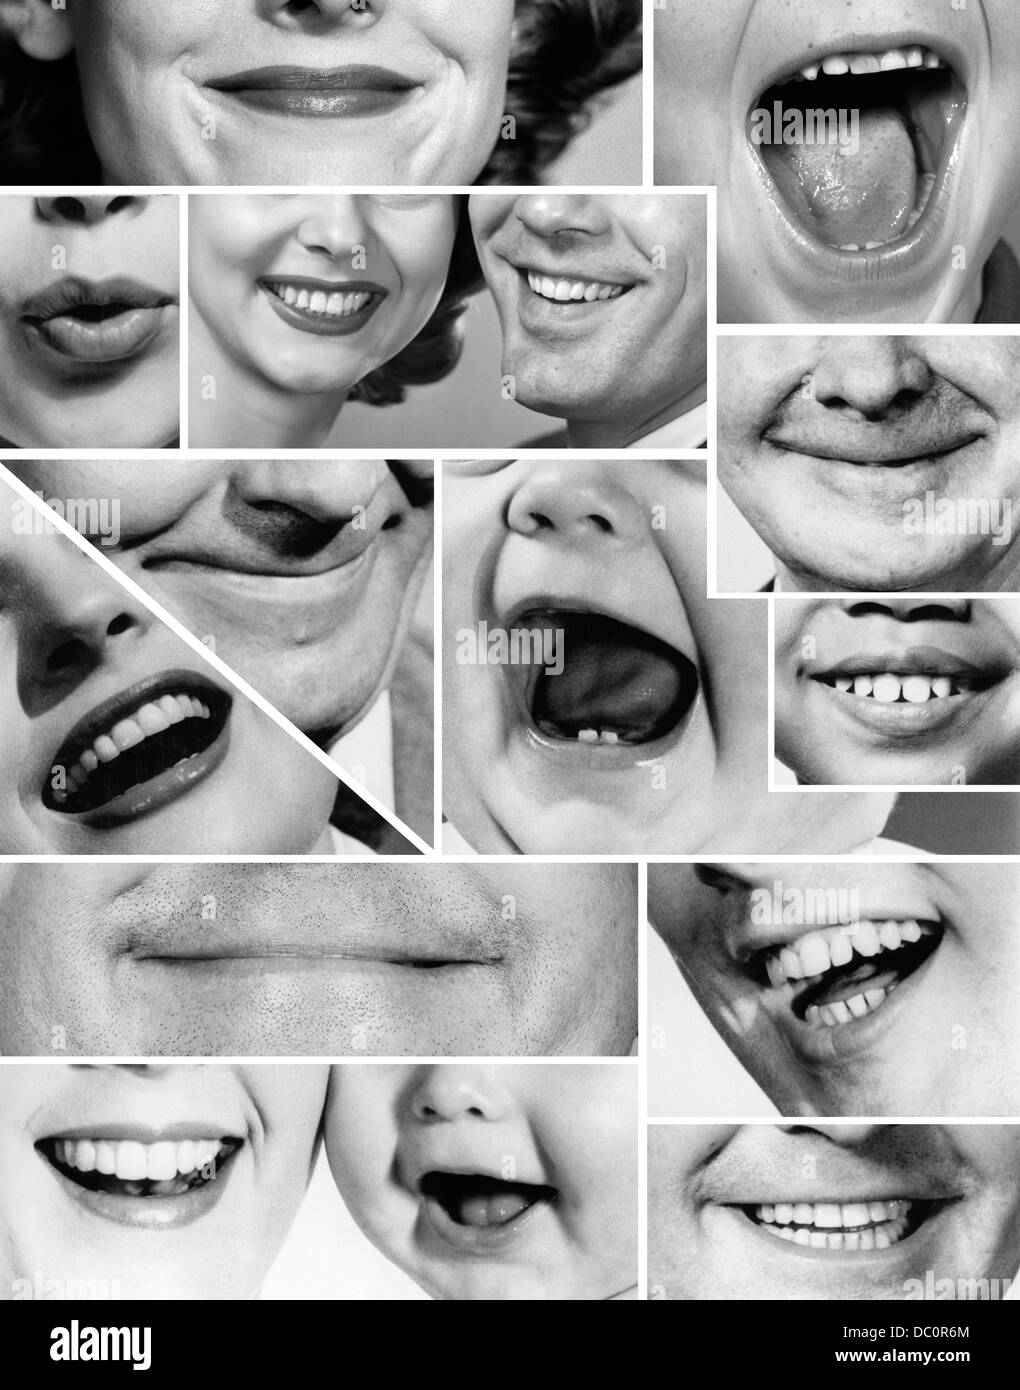 1950s 1960s COLLAGE MONTAGE OF SMILING LAUGHING MOUTHS OF MEN WOMEN BABIES Stock Photo